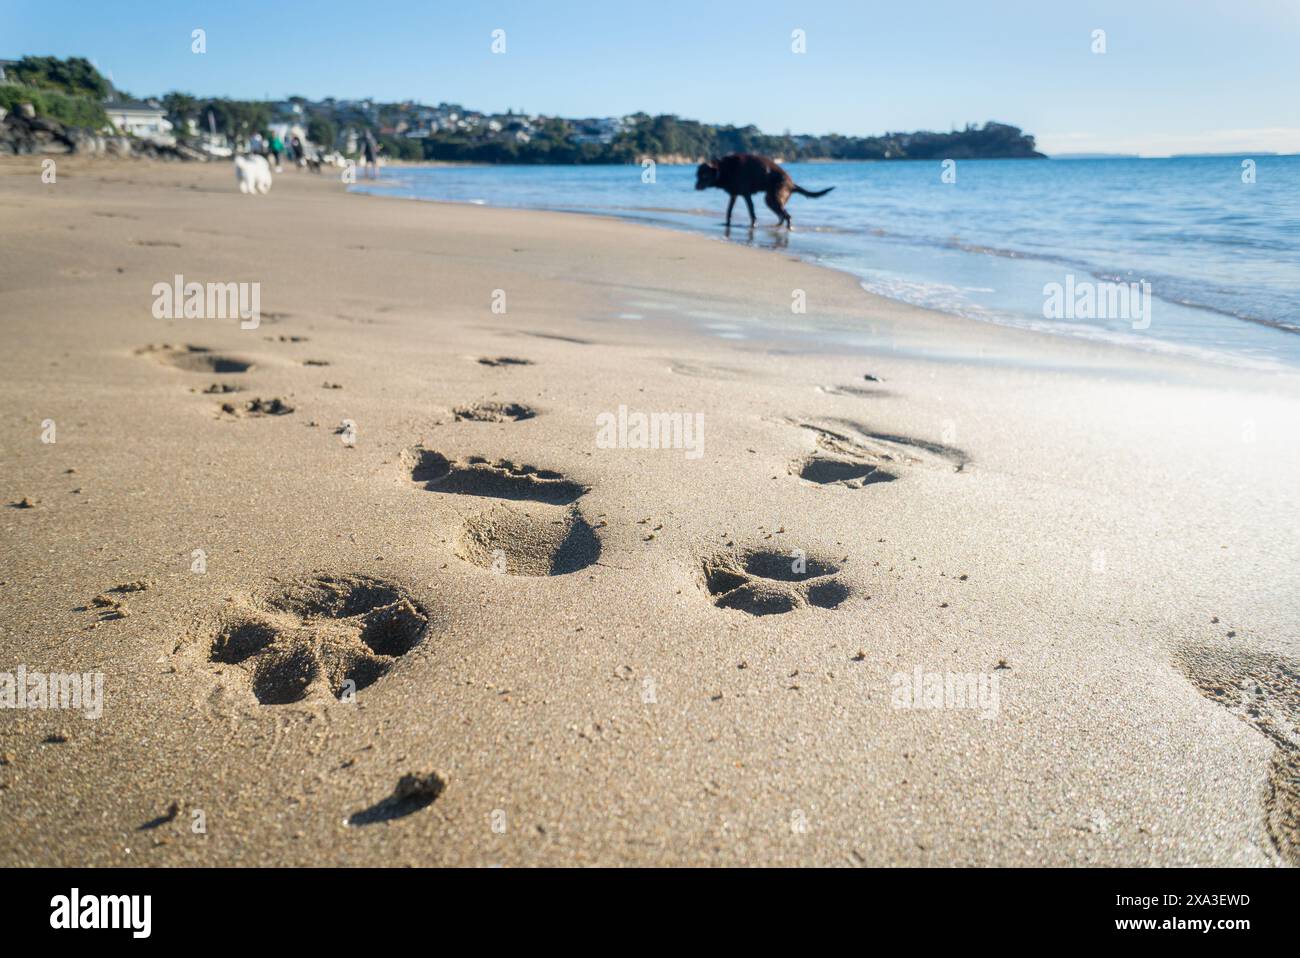 Paw prints and human footprints on the sand. Dogs and unrecognizable people walking on the beach. Milford Beach. Auckland. Stock Photo